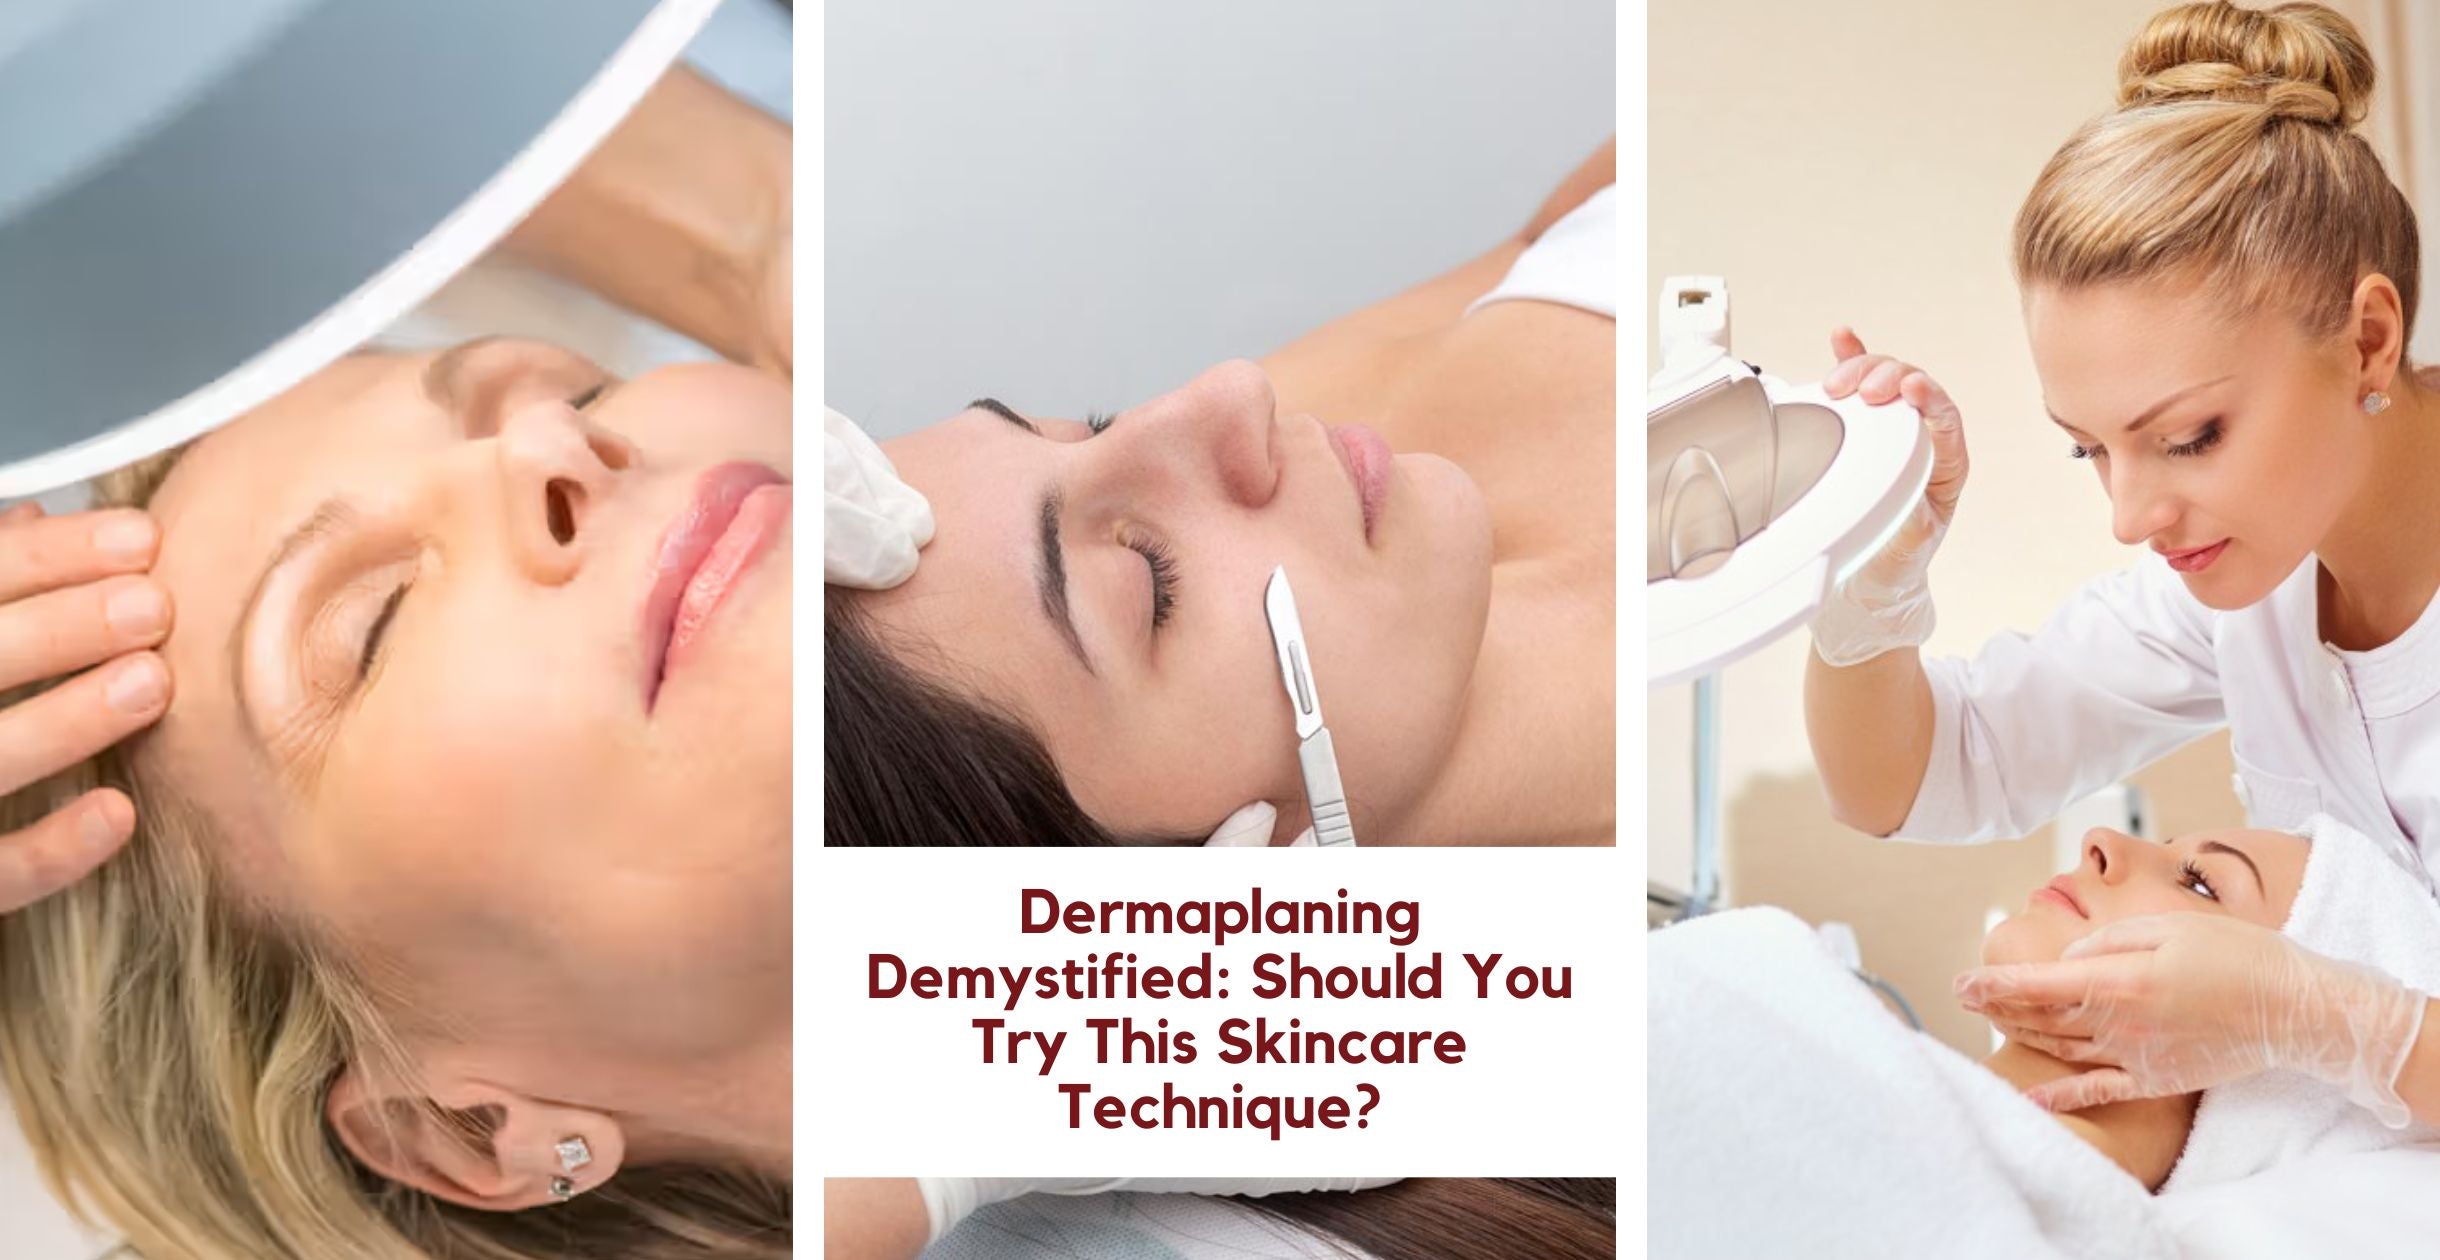 Dermaplaning Demystified: Should You Try This Skincare Technique?